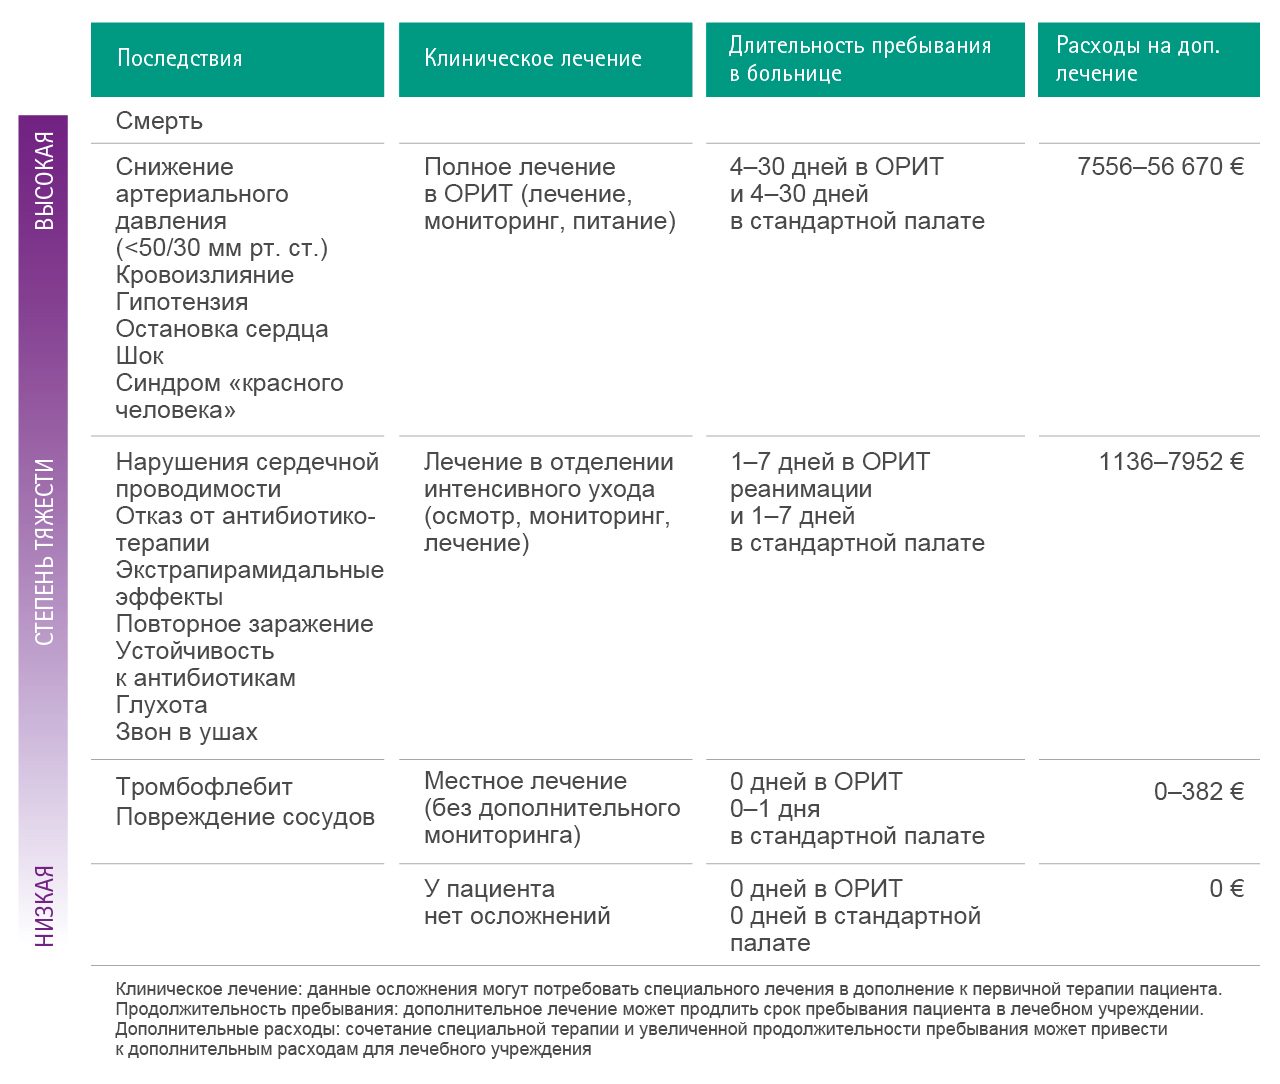 Table with estimations of possible additional costs as a consequence of complications caused by medication error.